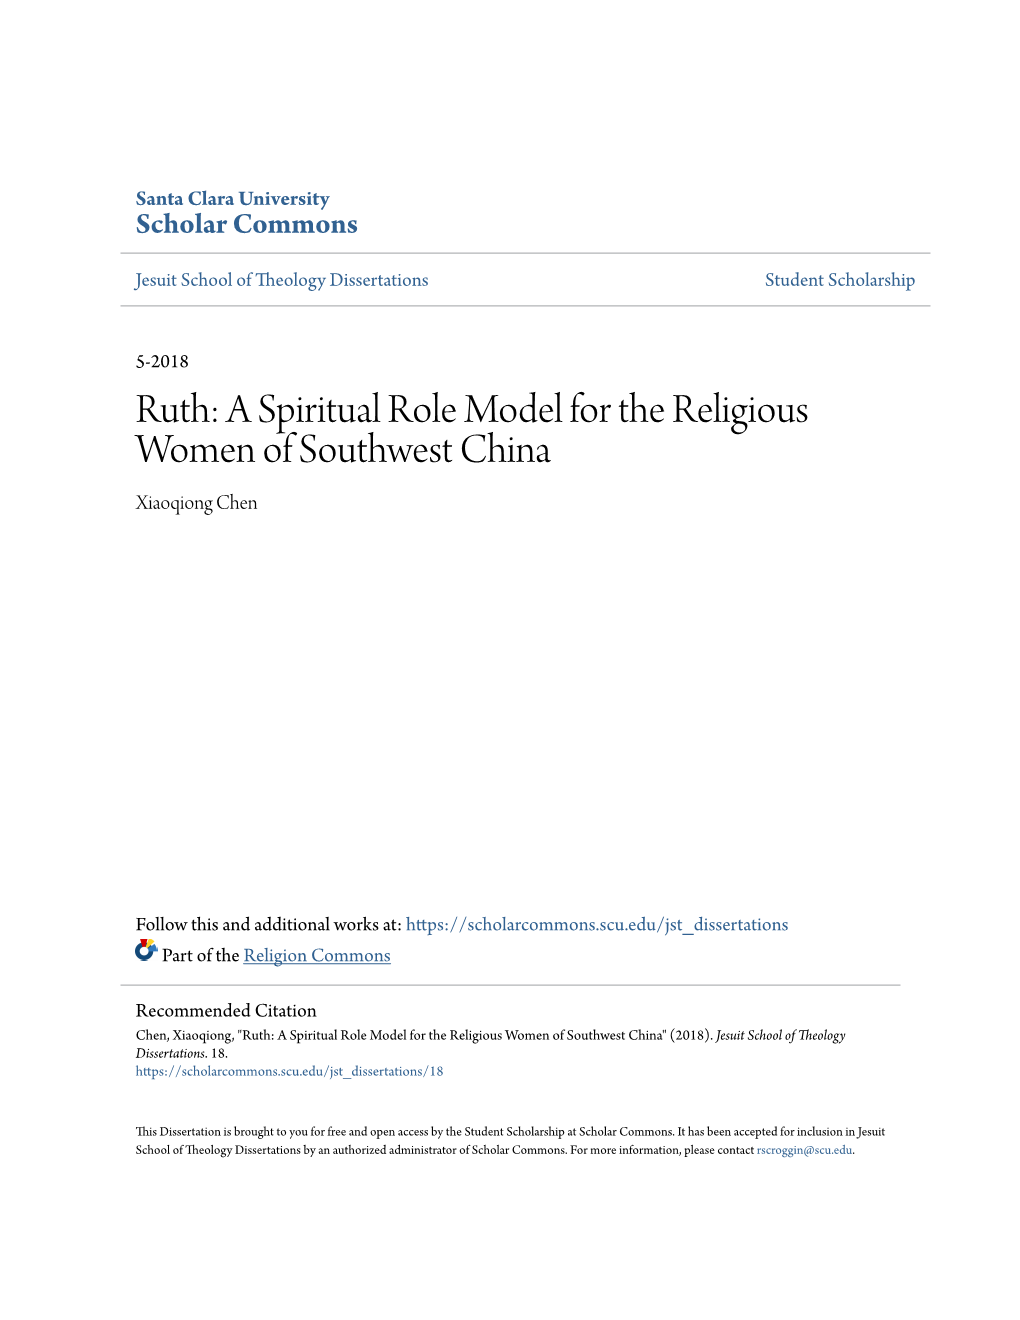 Ruth: a Spiritual Role Model for the Religious Women of Southwest China Xiaoqiong Chen